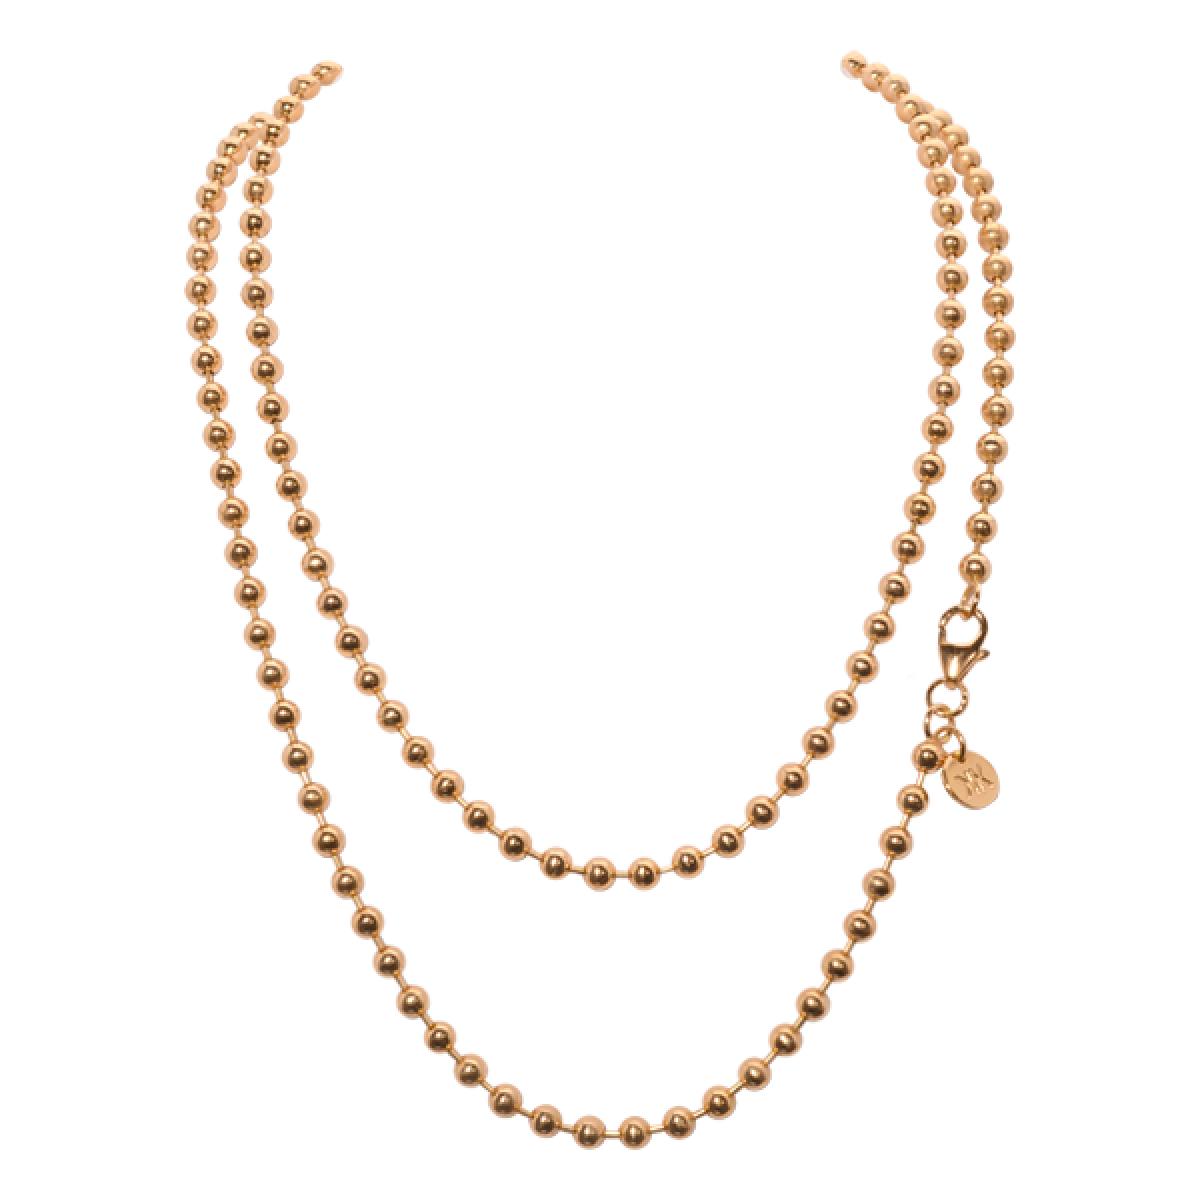 Jewellery Chain Png Hd - Gold, Transparent background PNG HD thumbnail